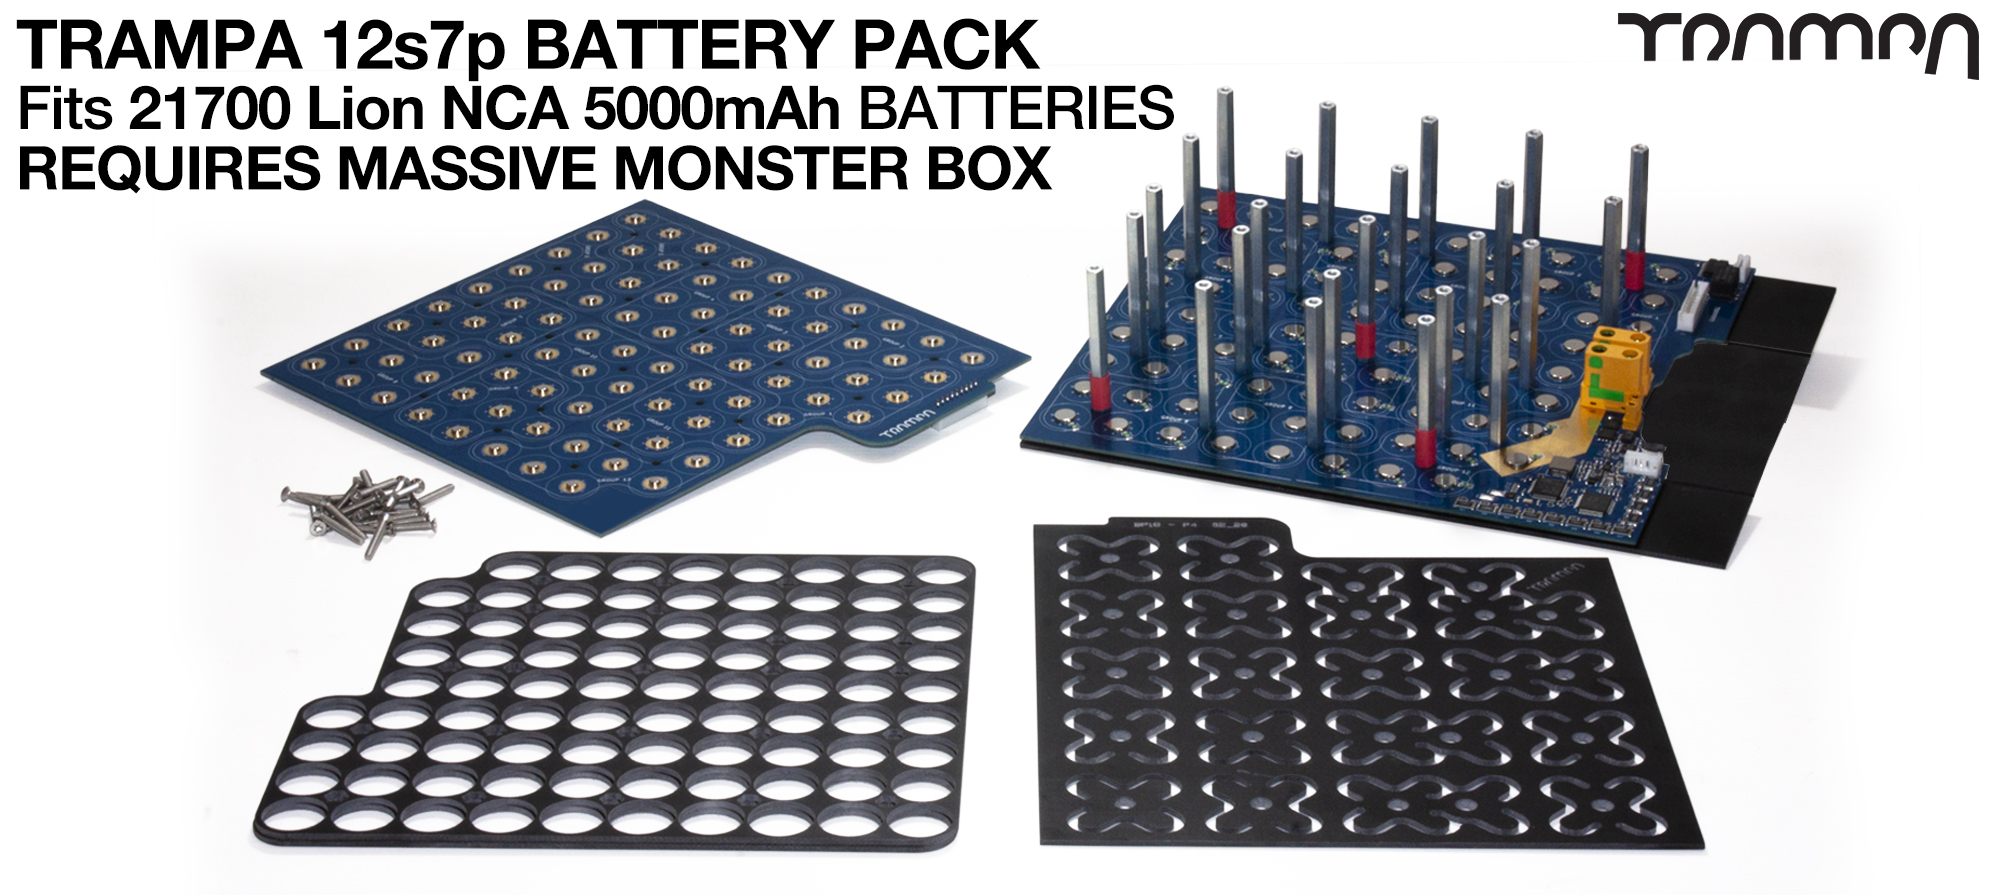 21700 PCB Pack with BMS - MASSIVE MONSTER box (1x HD-60T) fit 84 21700 cells to give up to 35A of range! Specifically made to work with TRAMPA's MASSIVE MONSTER Box fitting to TRAMPA Electric Decks but can be adapted to fit anything!!